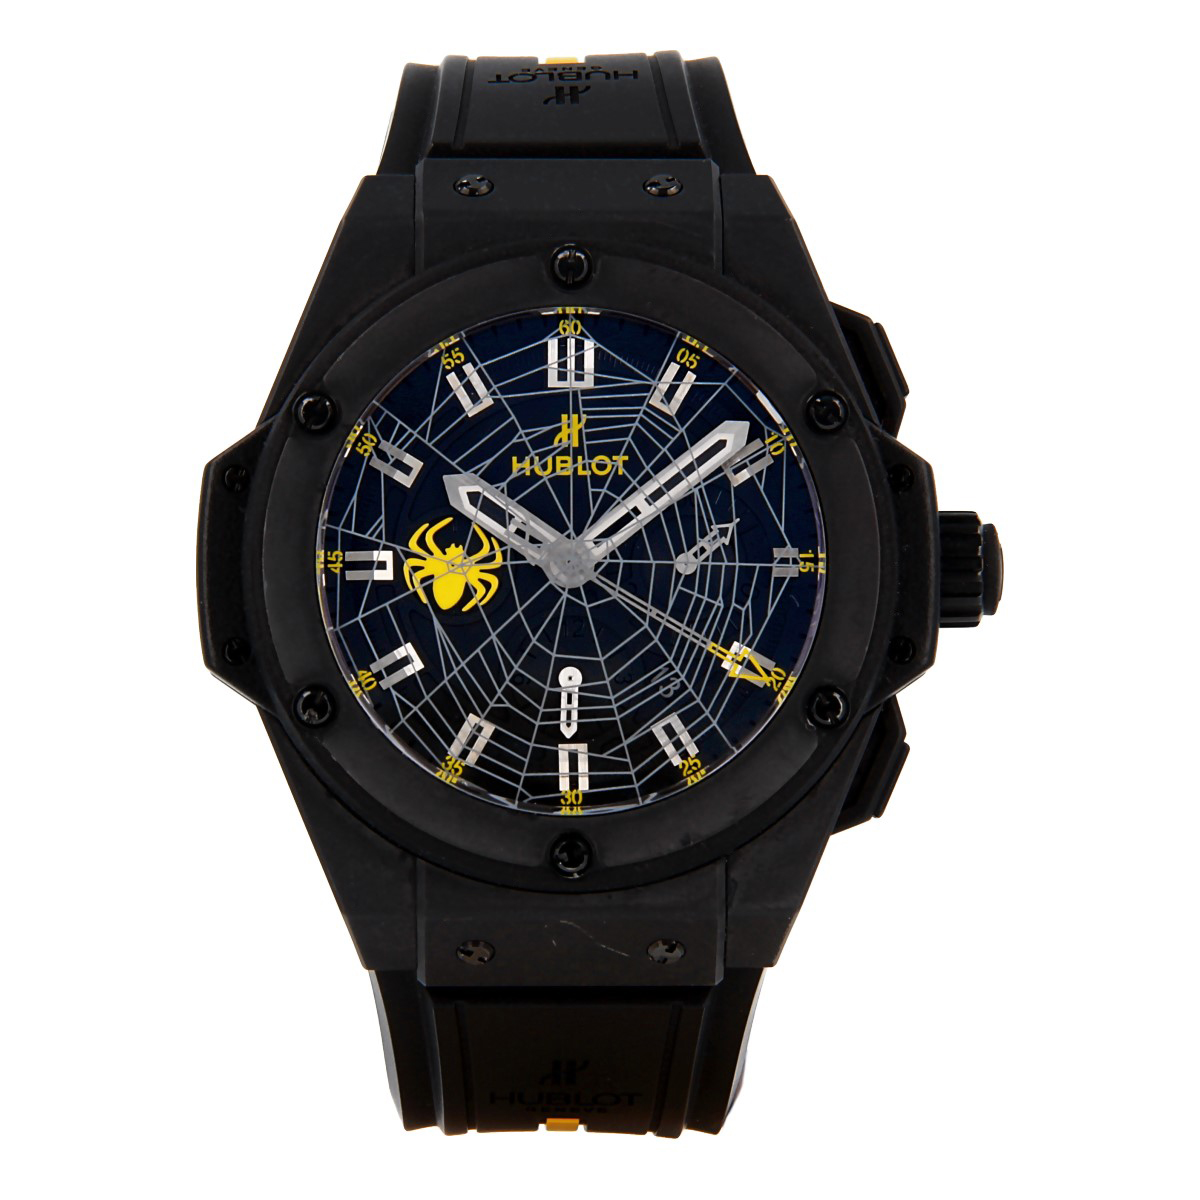 Hublot King Power Spider Bang Chronograph Limited Edition | Buy pre-owned Hublot watch